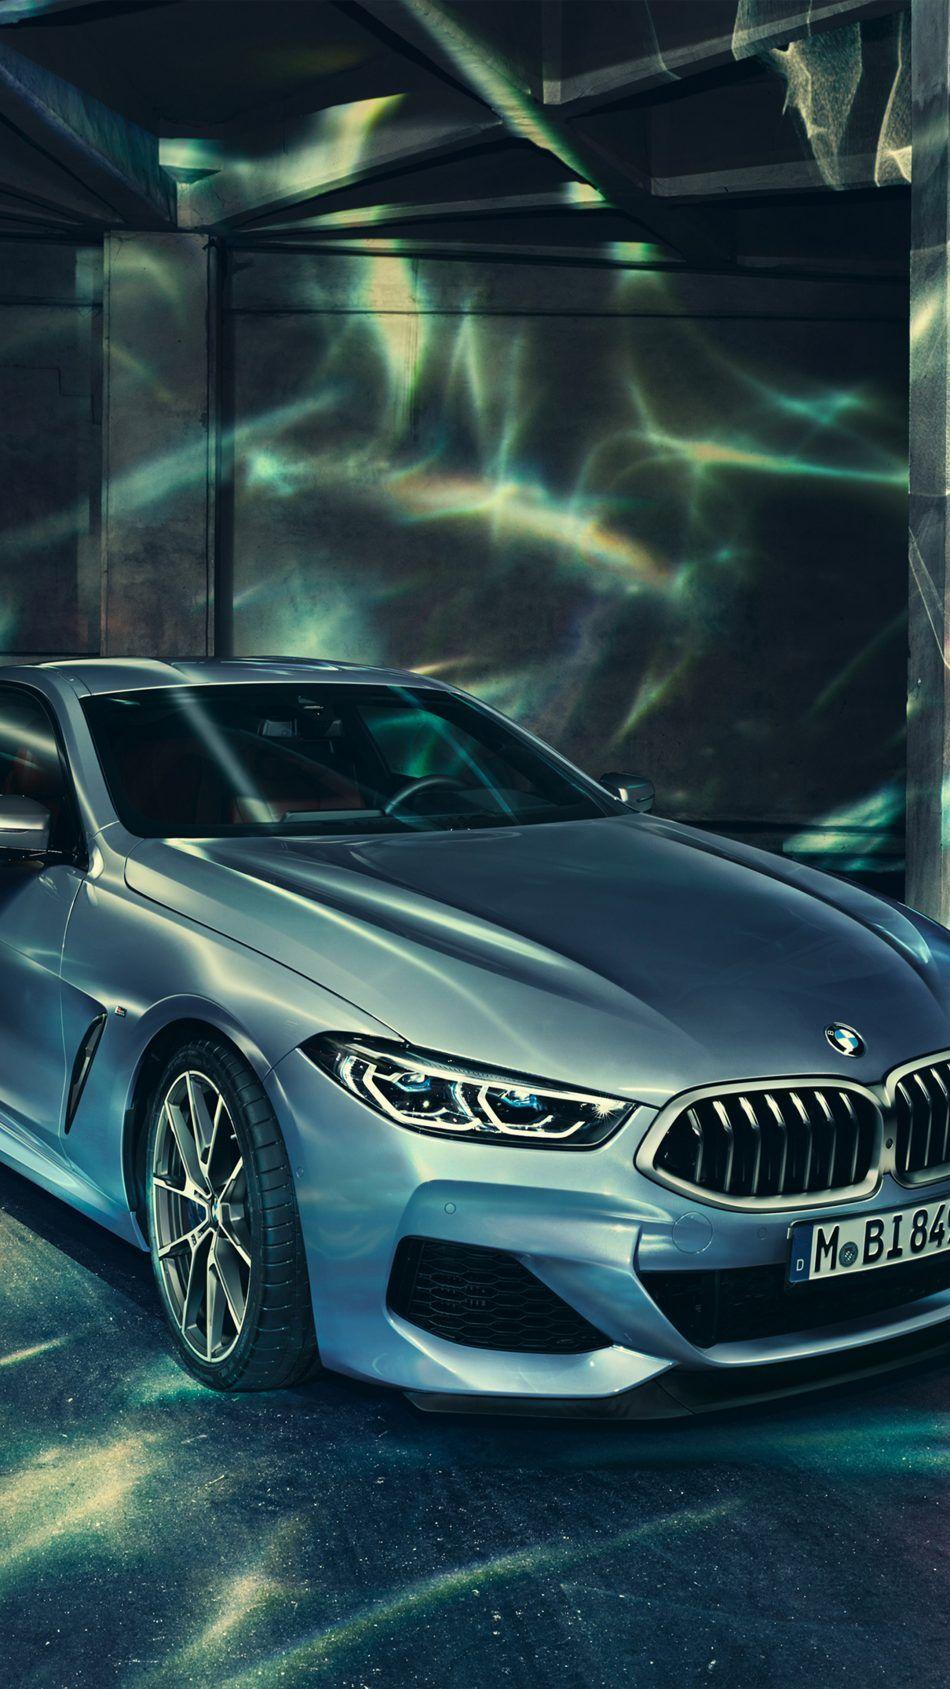 BMW 8 Series 2019. Bmw, Car in the world, Cool car picture